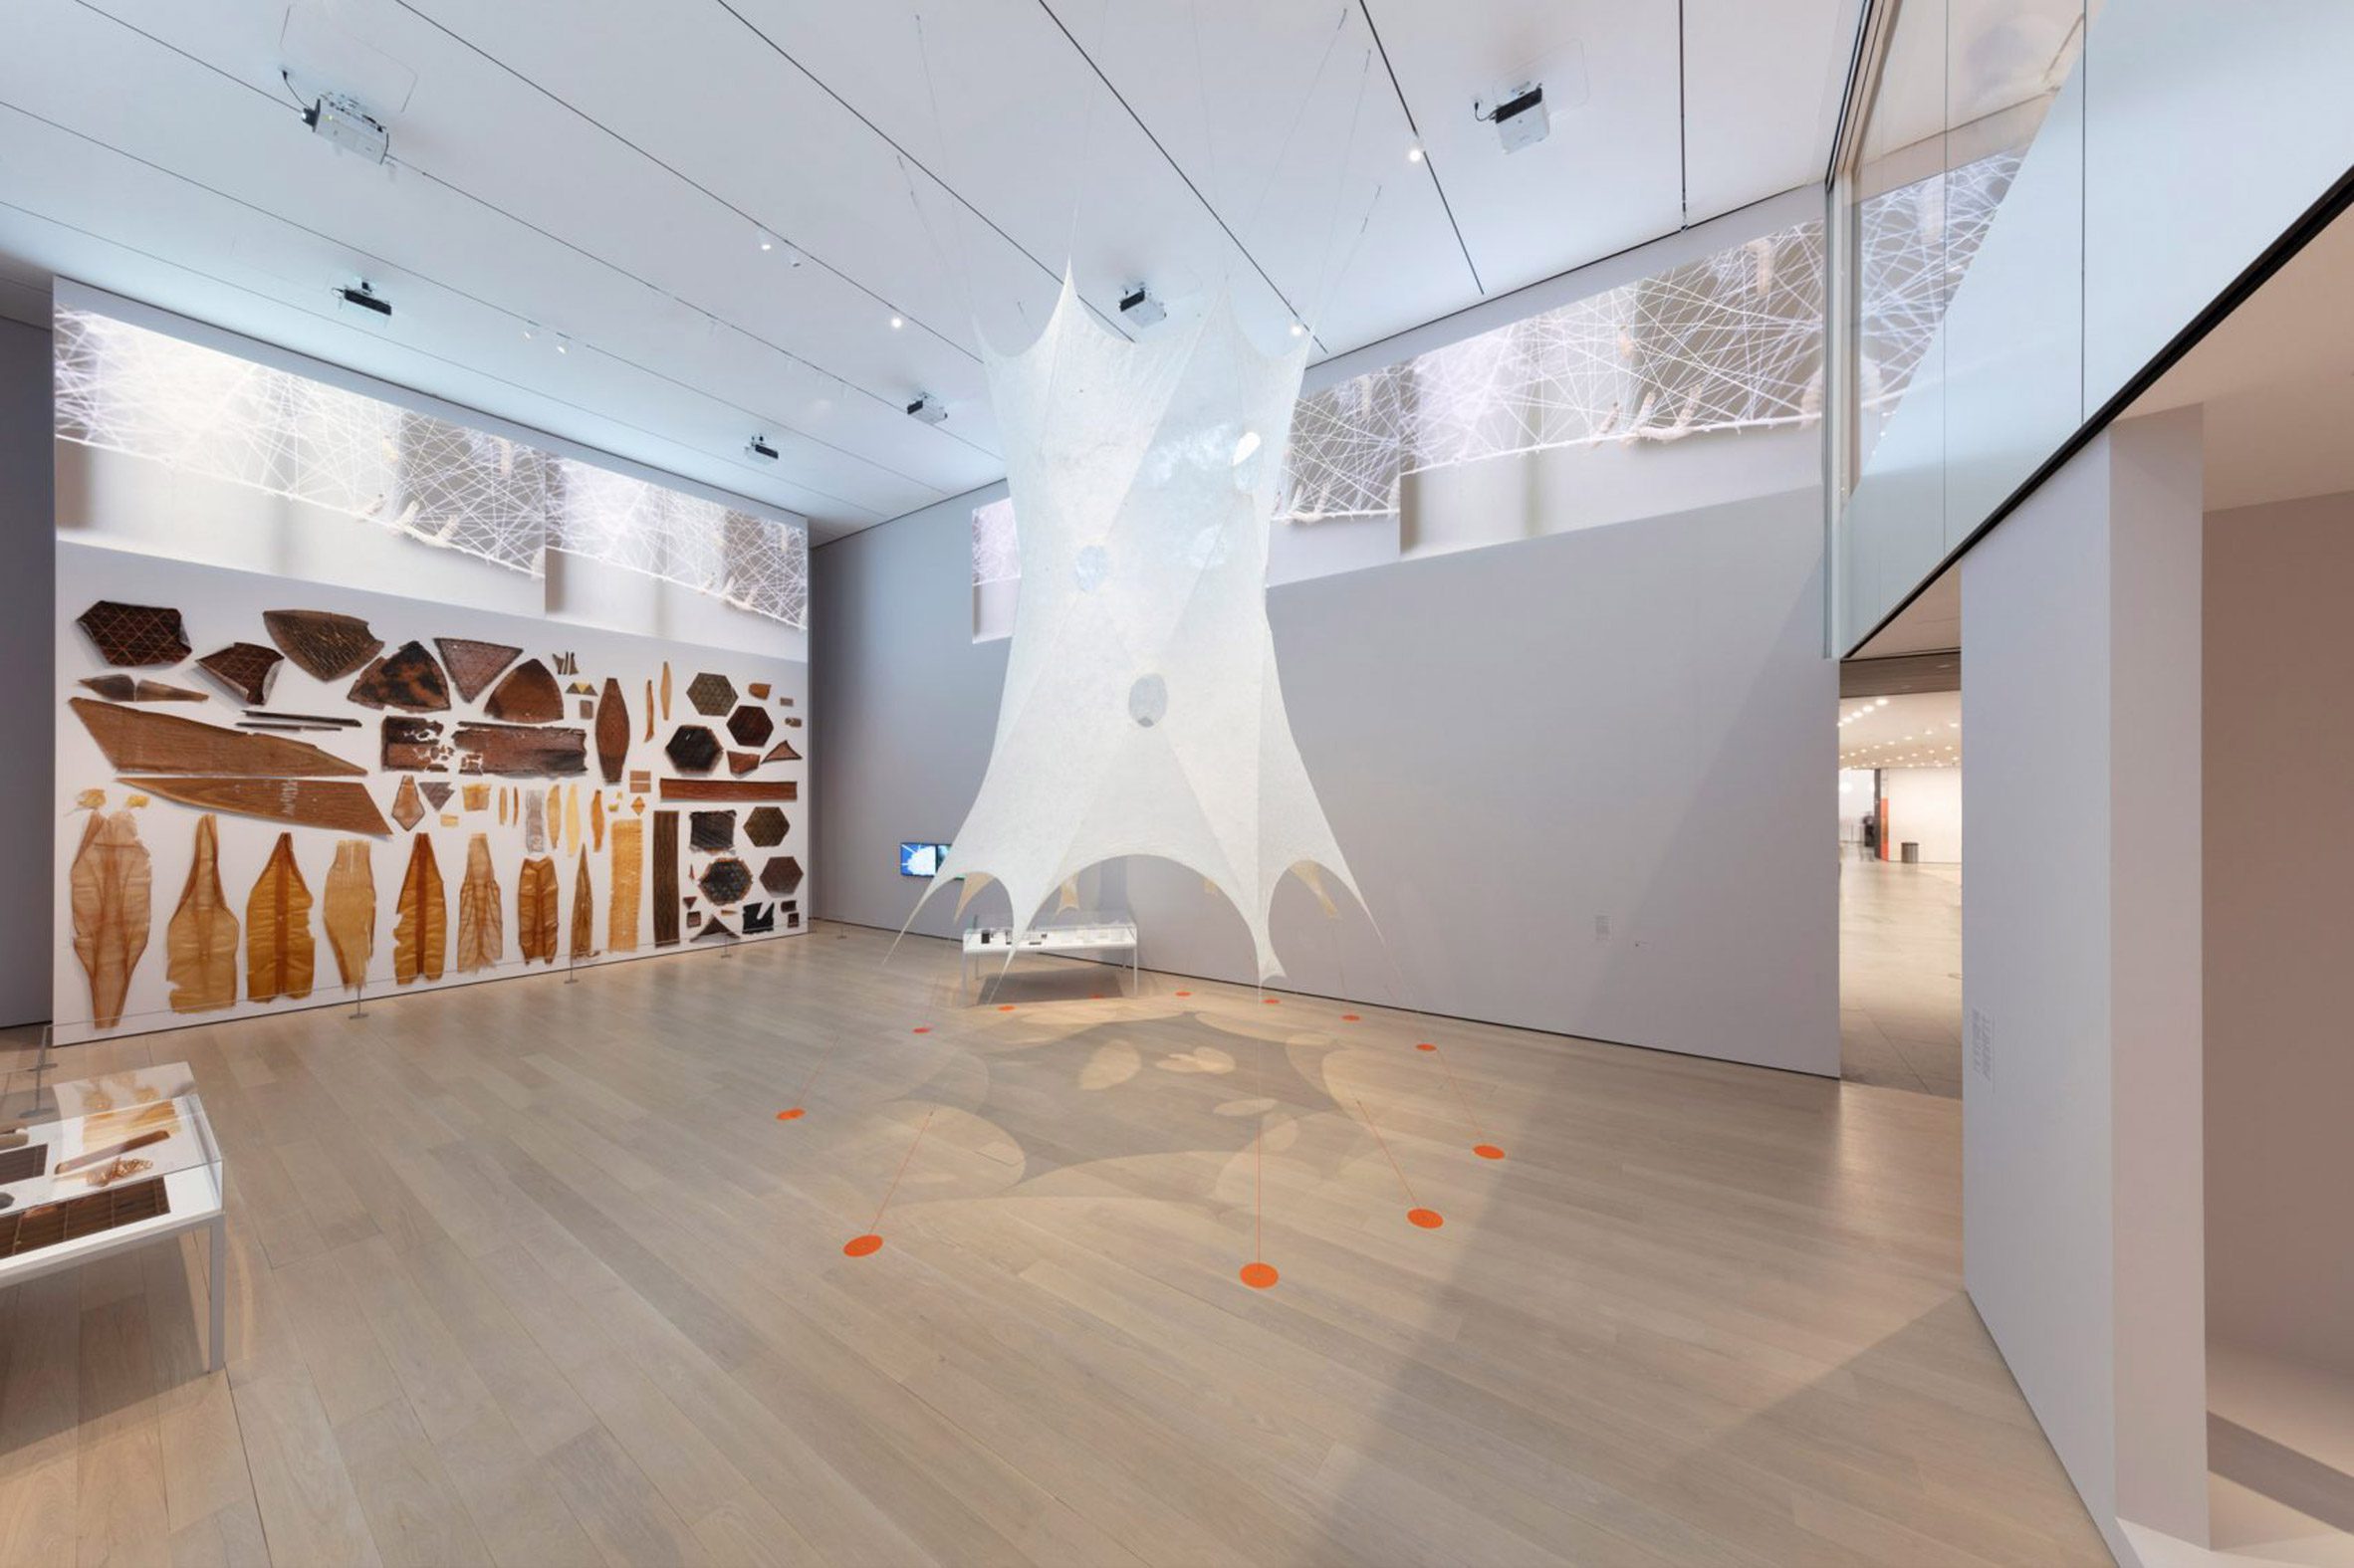 Photo of Neri Oxman's Silk Pavilion II – a tall, ethereal tube of sheer white silk material suspended between the floor and ceiling in the Museum of Modern Art New York